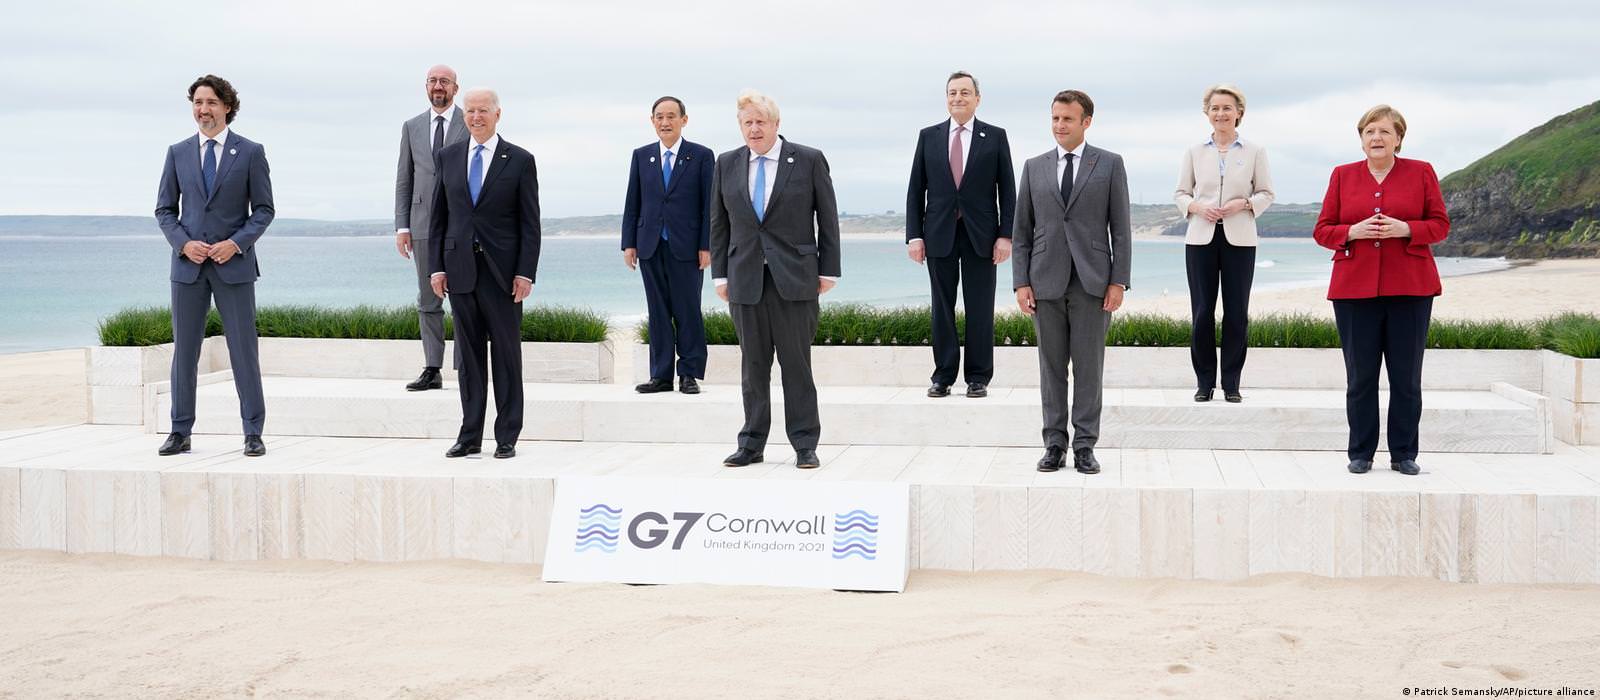 Naval Diplomacy: The Case For A Maritime G7